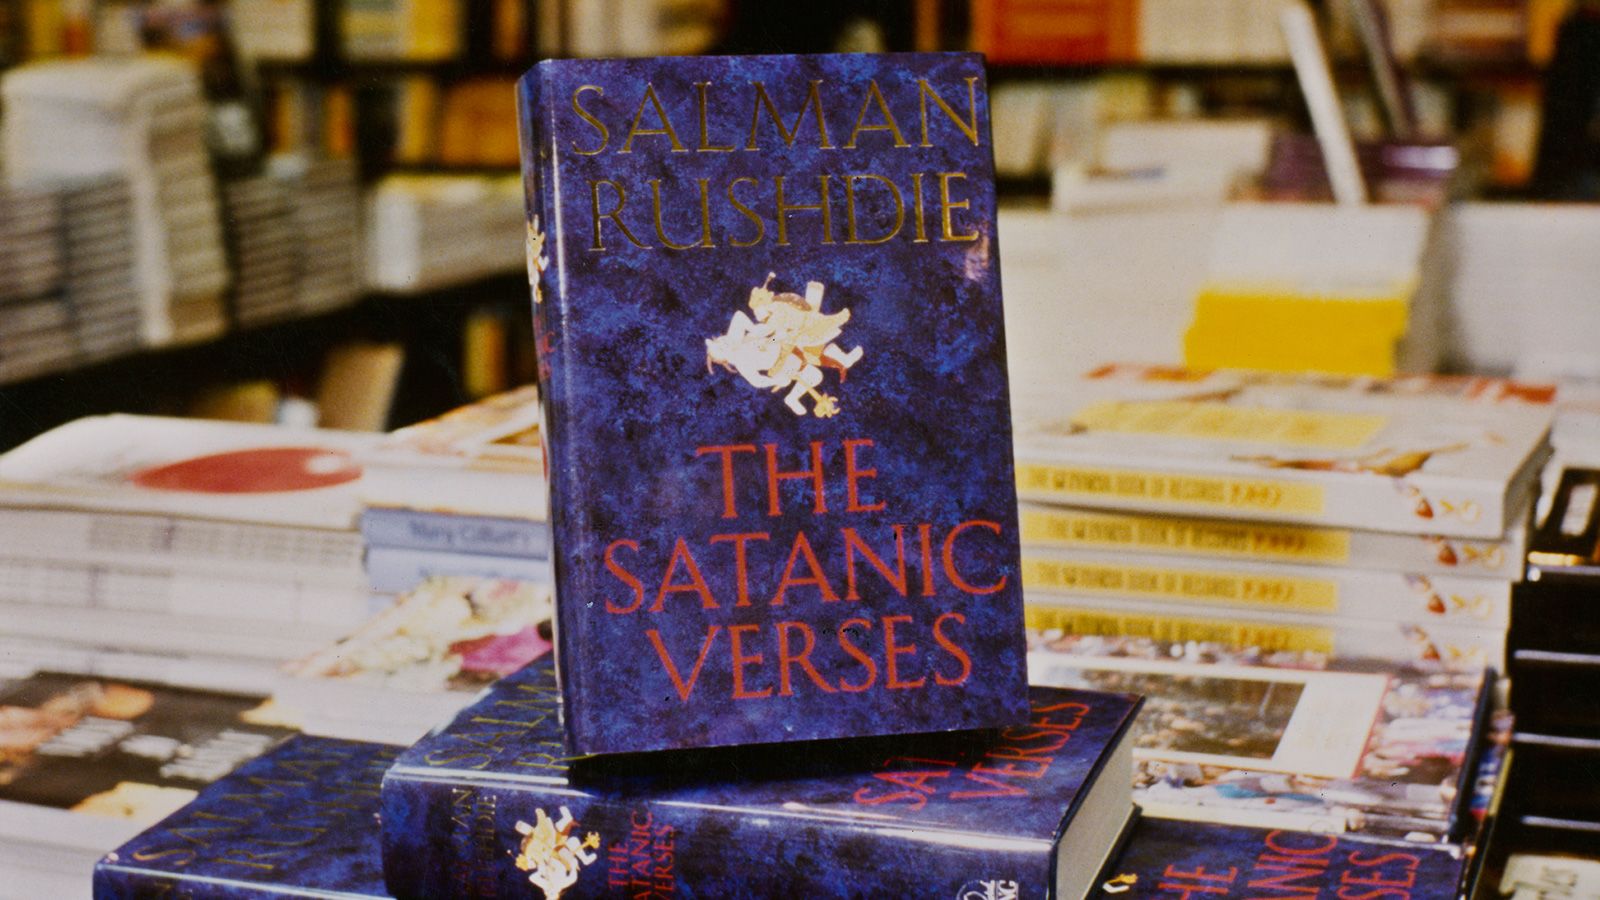 In which year Satanic verses was banned?